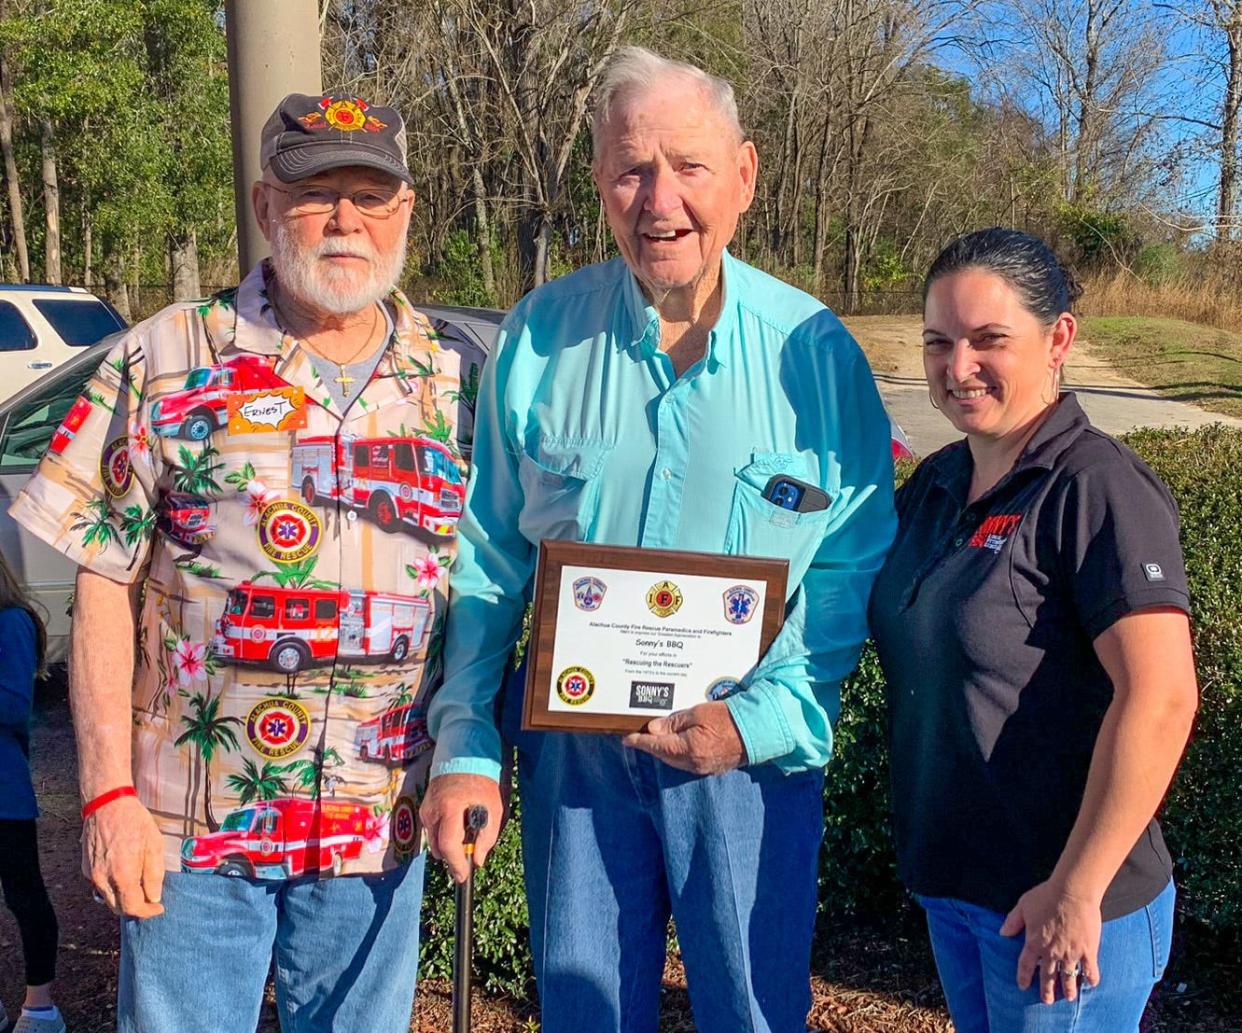 Sonny's BBQ founder Sonny Tillman, center, and Sonny's BBQ Alachua General Manager Cari Risgby, right, are honored Friday with the "Rescuers of Rescuers" award from Alachua County Fire Rescue's Ernest Wigglesworth, for more than 50 years of support of local first responders.